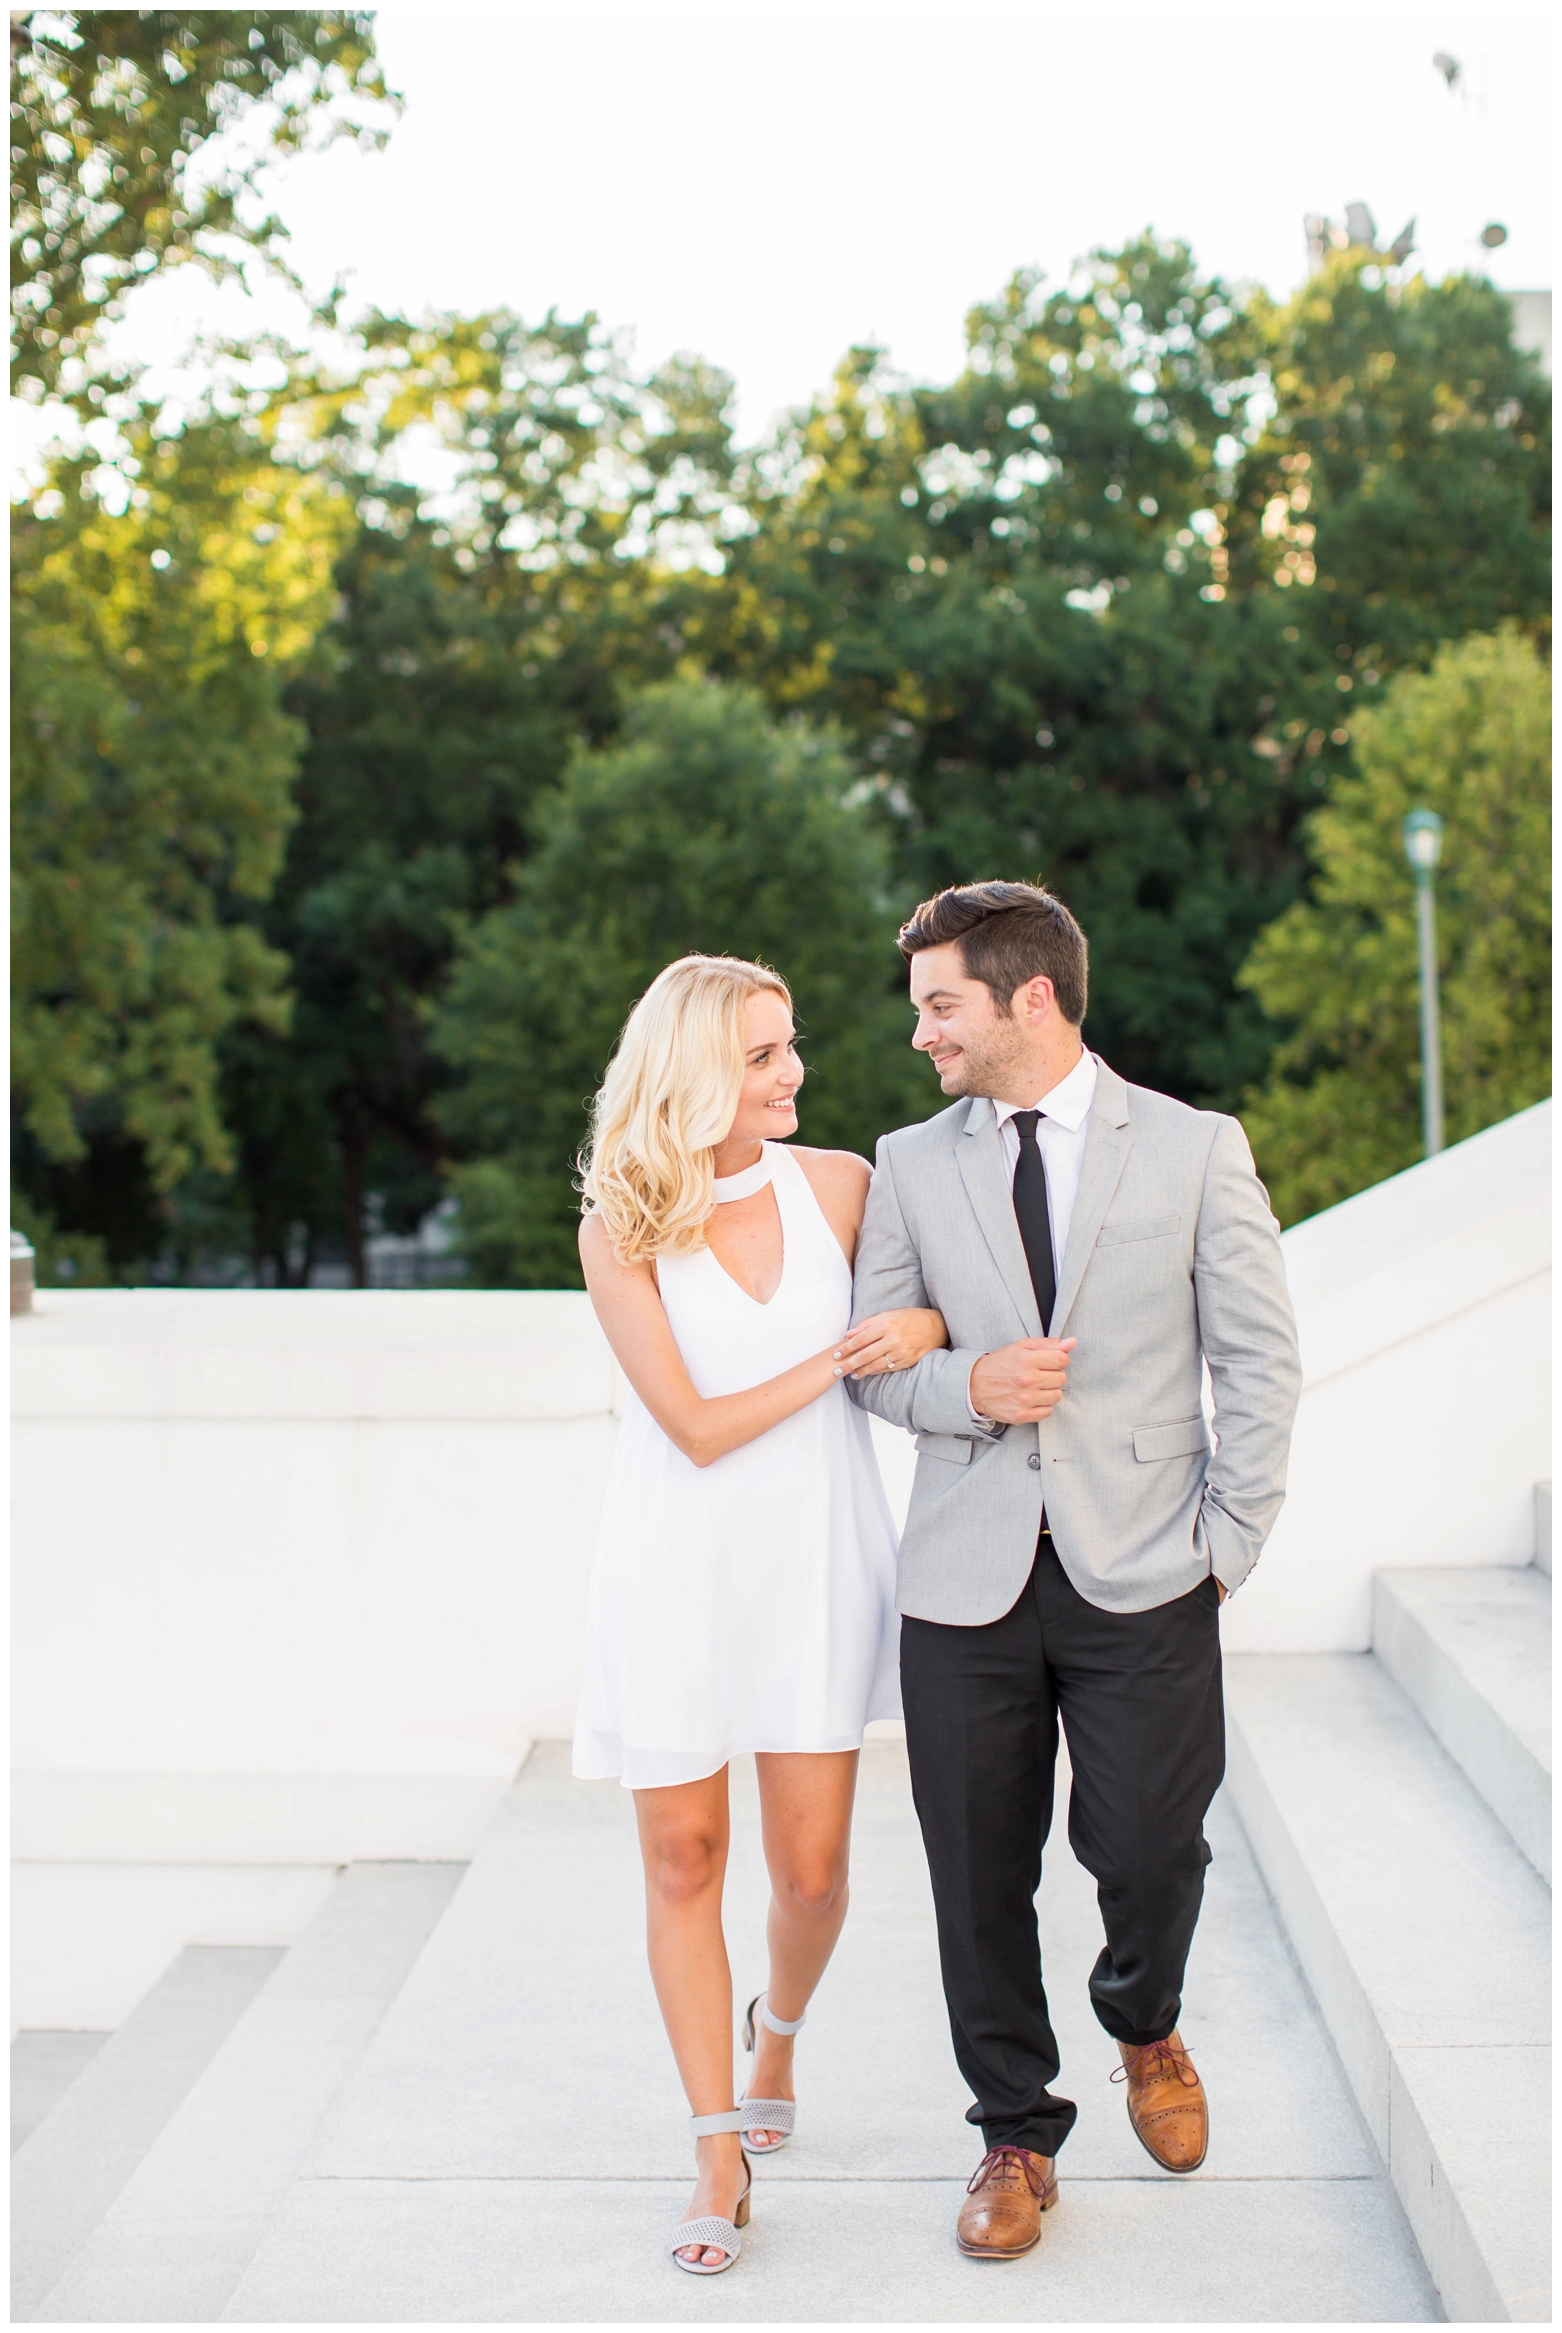 View More: http://hopetaylorphotographyphotos.pass.us/susie-and-darren-engagement